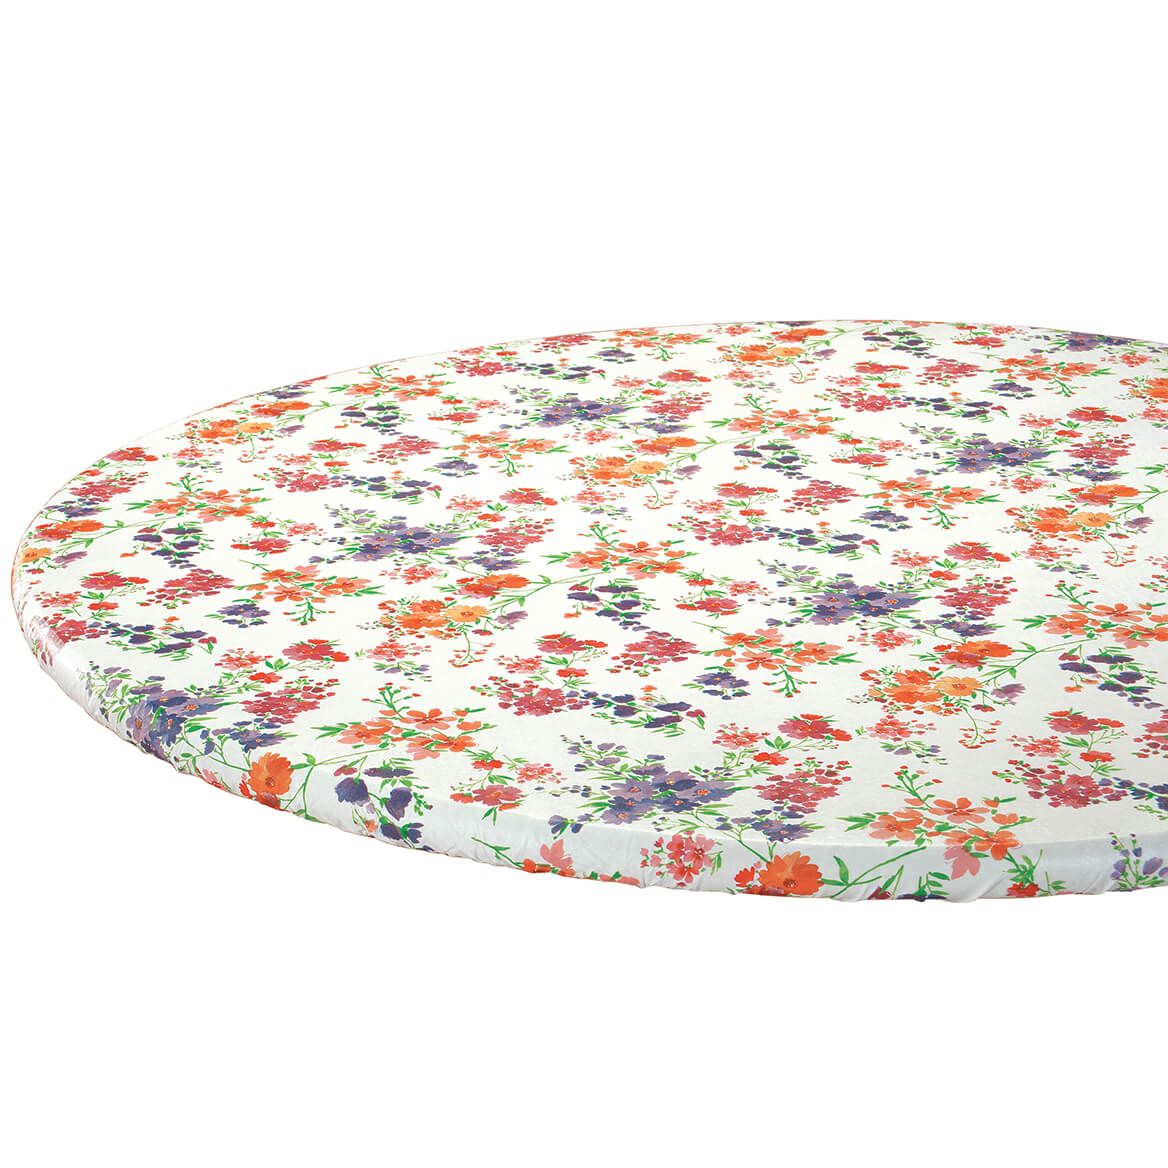 Wildflowers Elasticized Table Cover by Chef's Pride + '-' + 373216